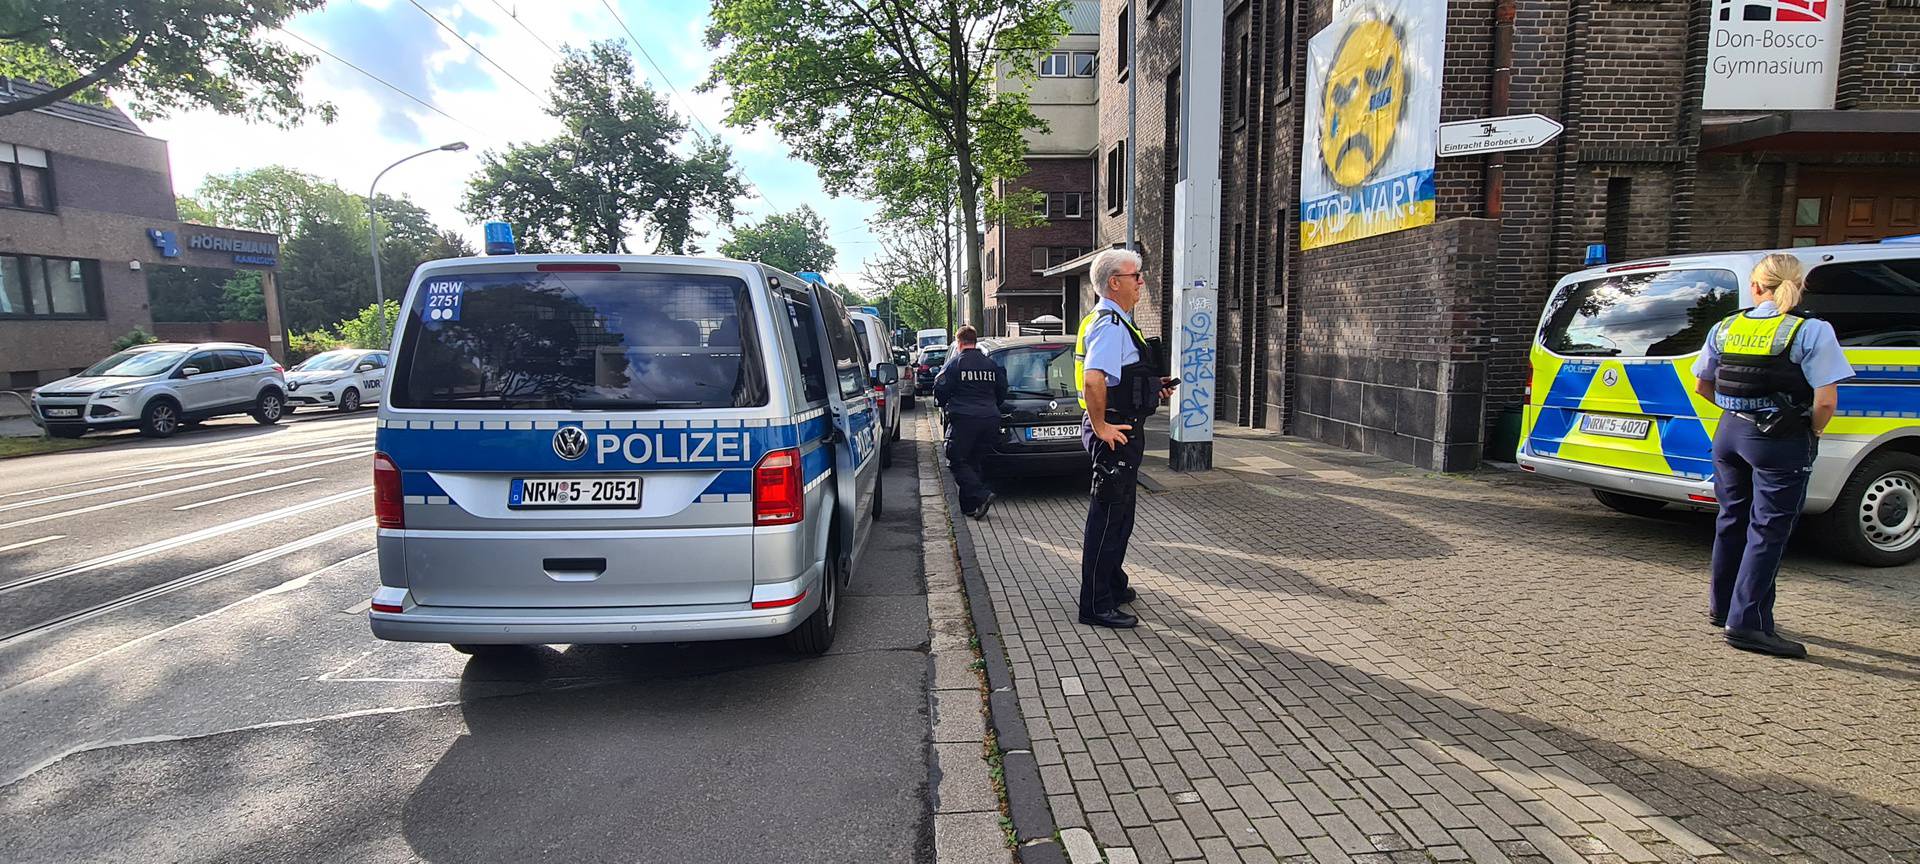 Police action at two schools in Essen